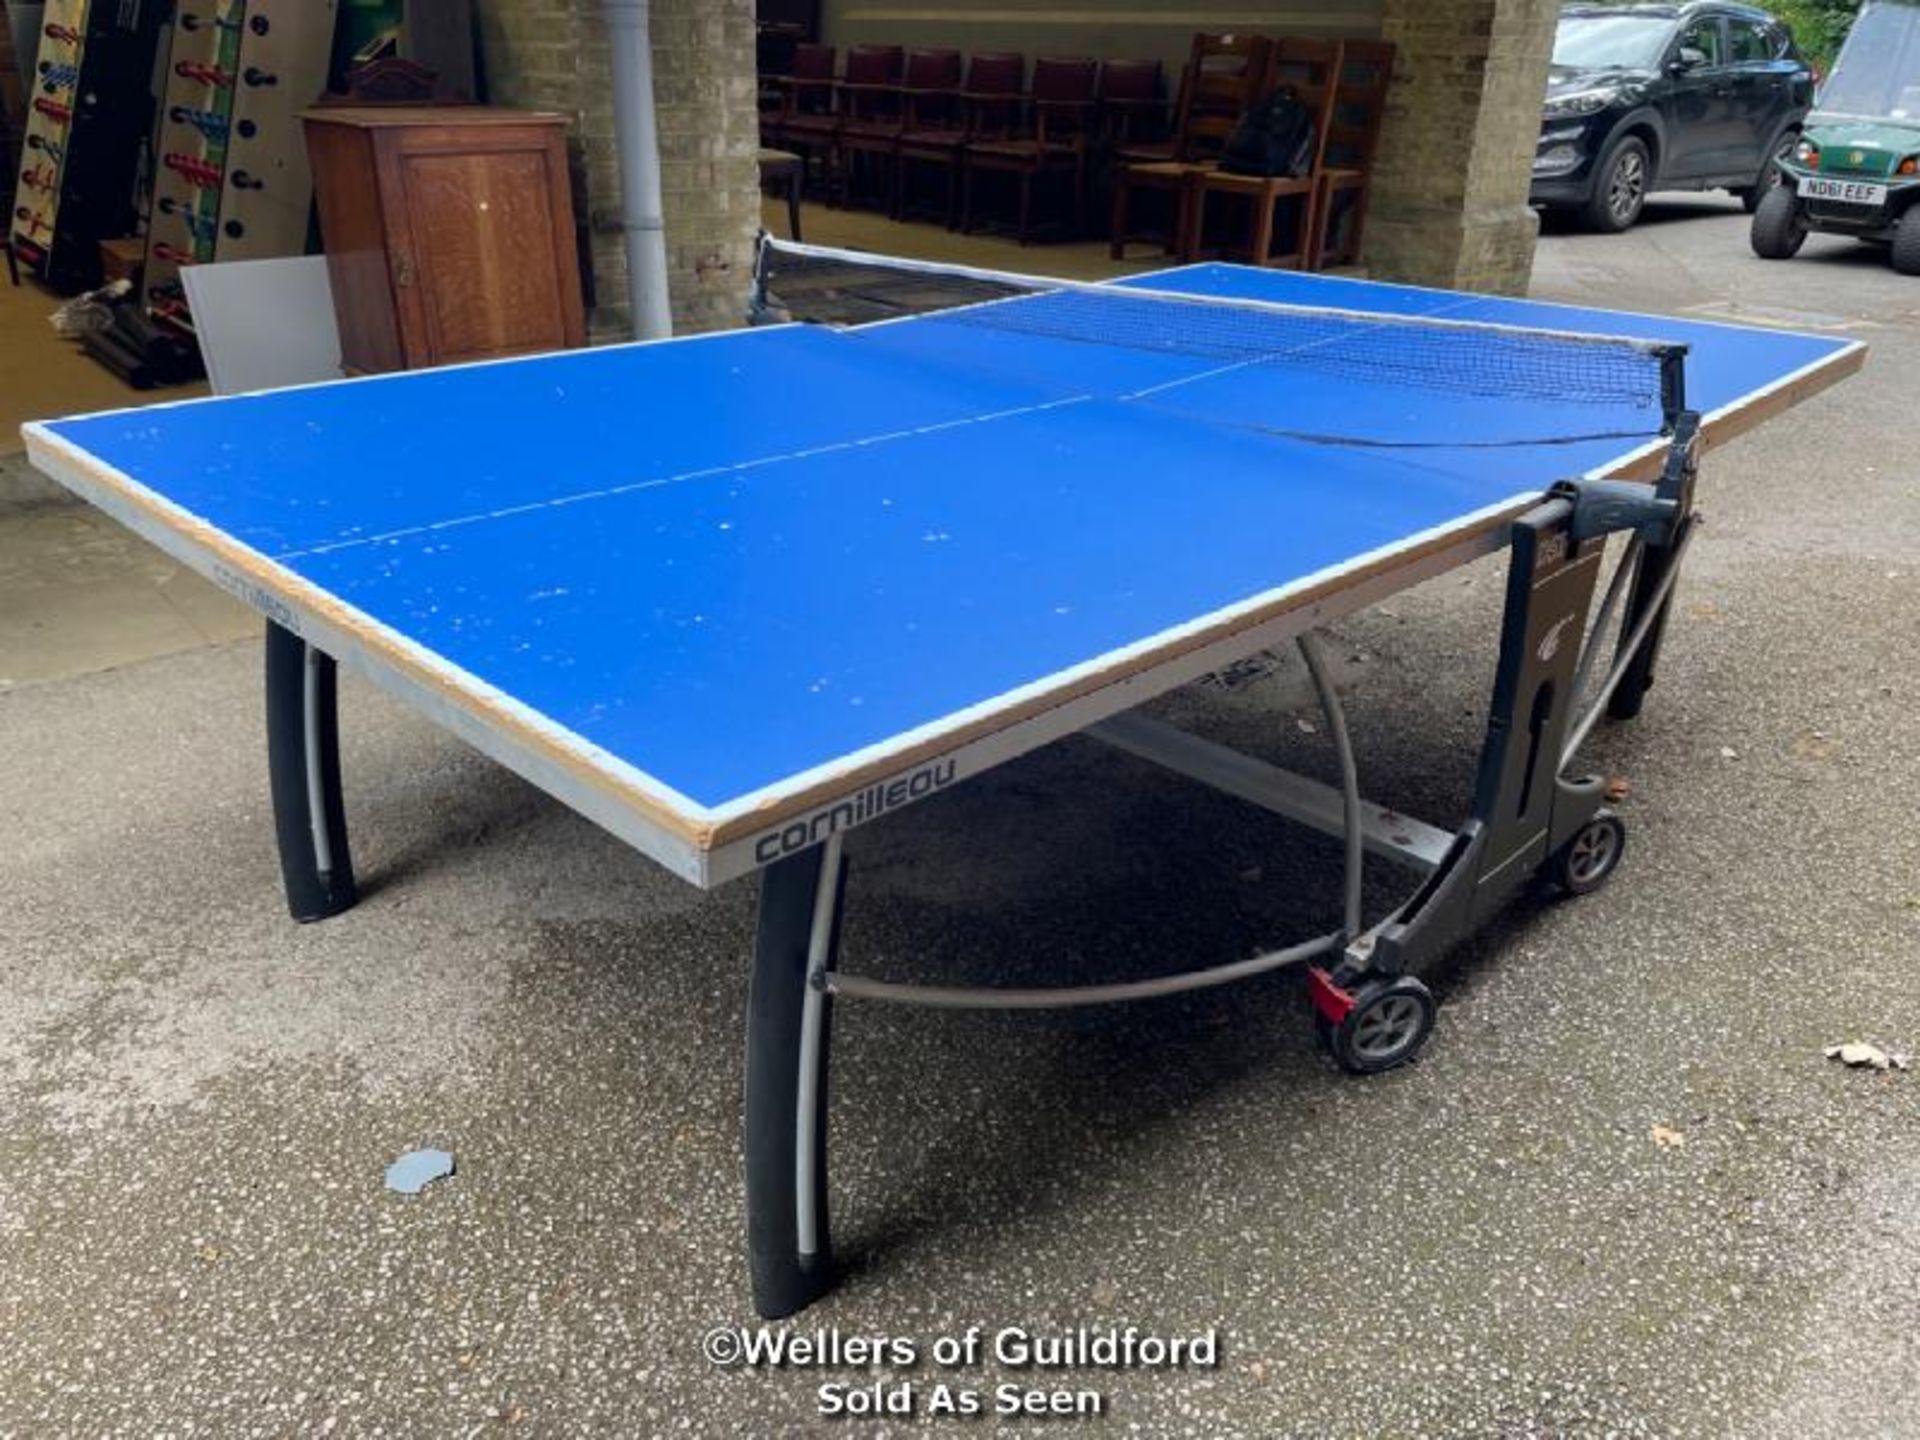 *CORNILLEAU FOLDING TABLE TENNIS TABLE WITH NET, NET NEEDS REPLACING ND NET FIXINGS NEED SORTING -